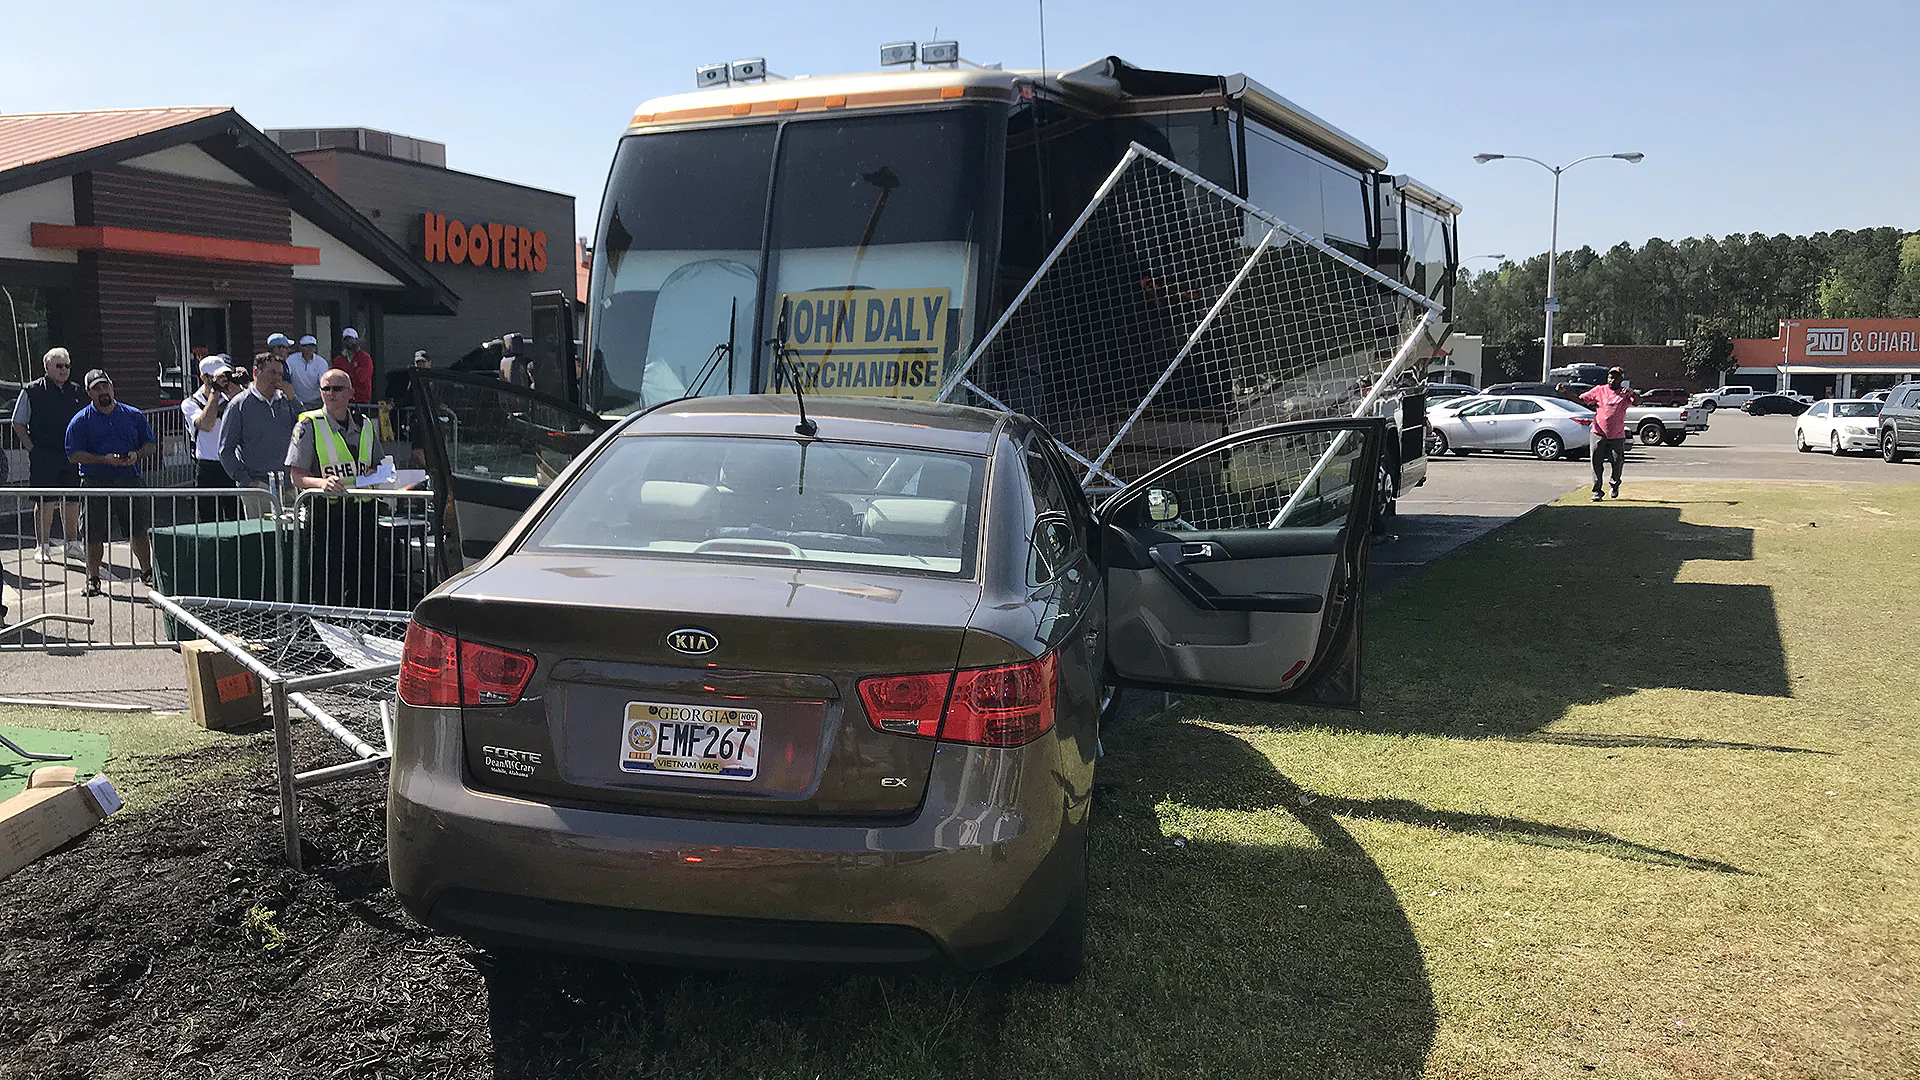 Car crashes into Daly's bus in Augusta parking lot